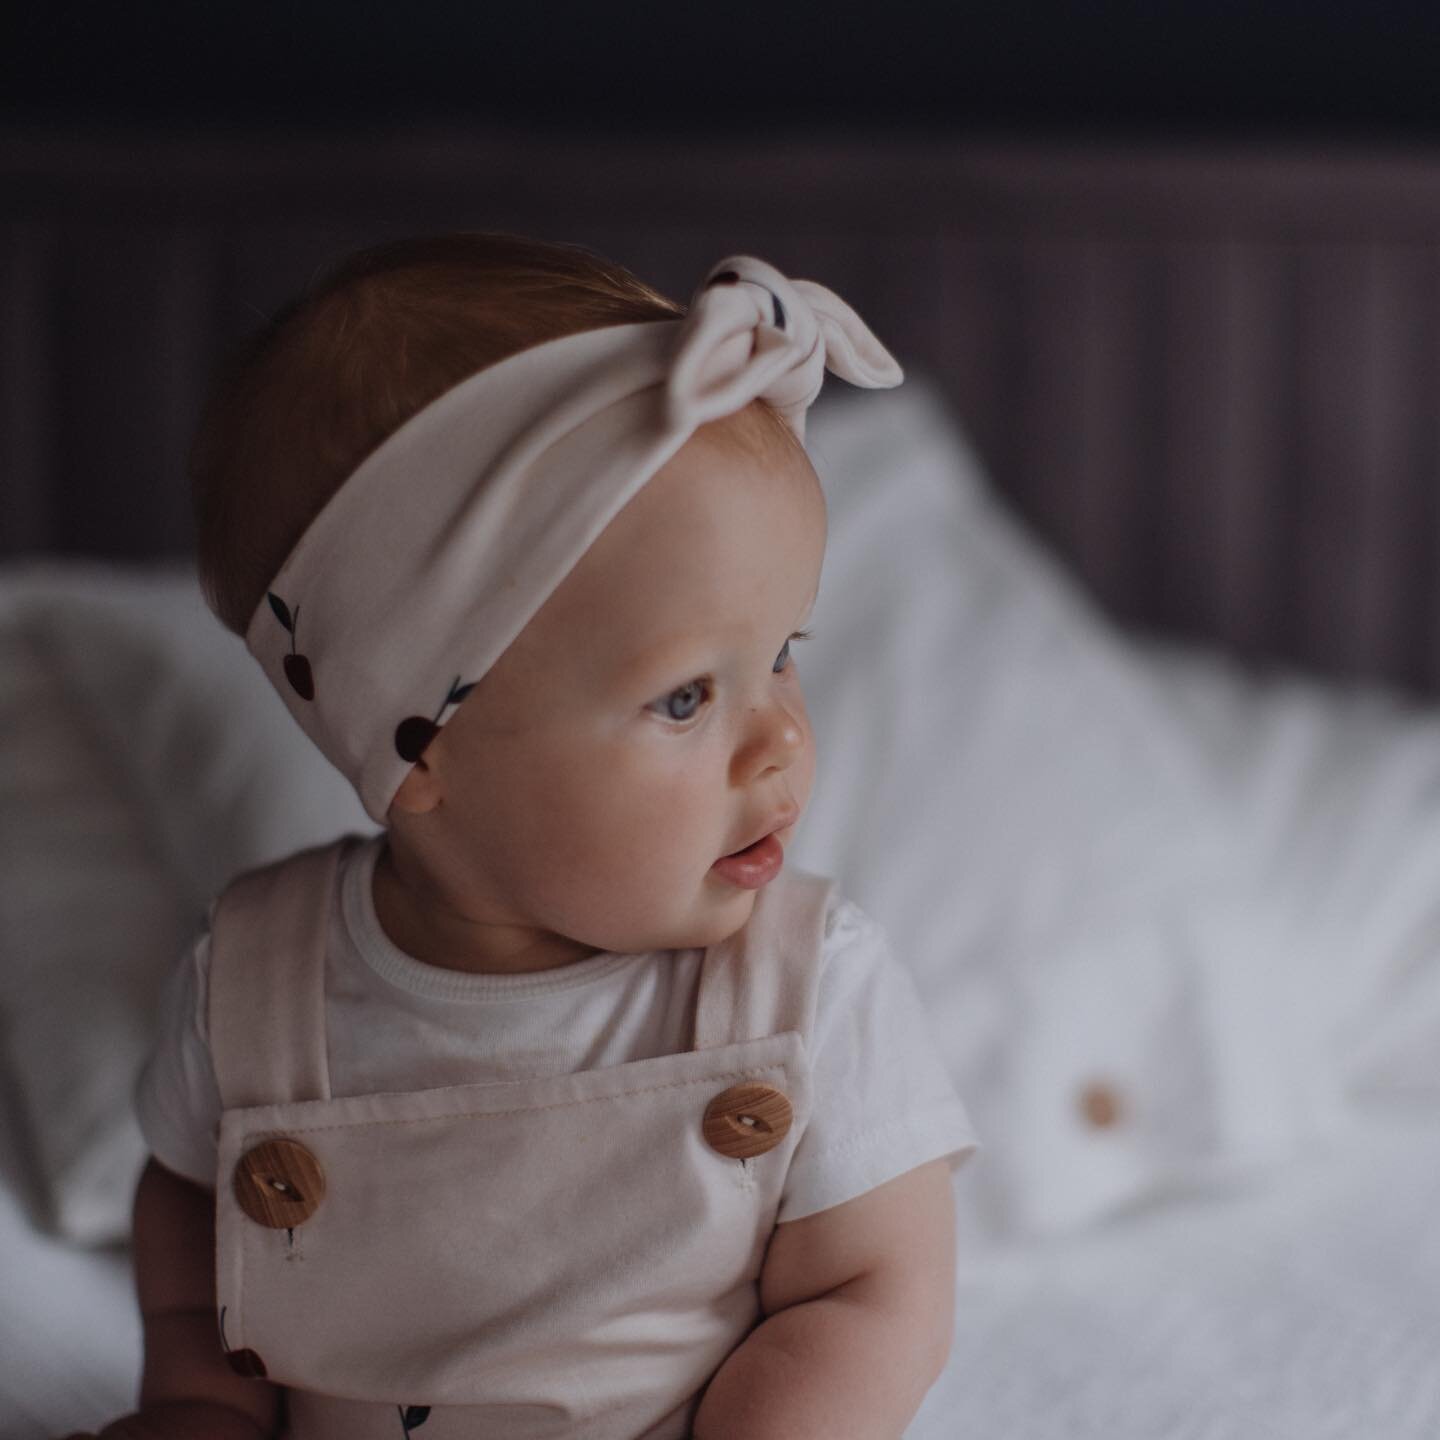 Check out our cute baby headbands. Variety of colours 🍒🌈to match any outfit.

#babyheadband #headband #luxurykidswear #naturalfashion #ecoliving #greenliving #babygirl #mumlife #babypic #childrensphotography #babylifestyle #babyfashion #plasticfree